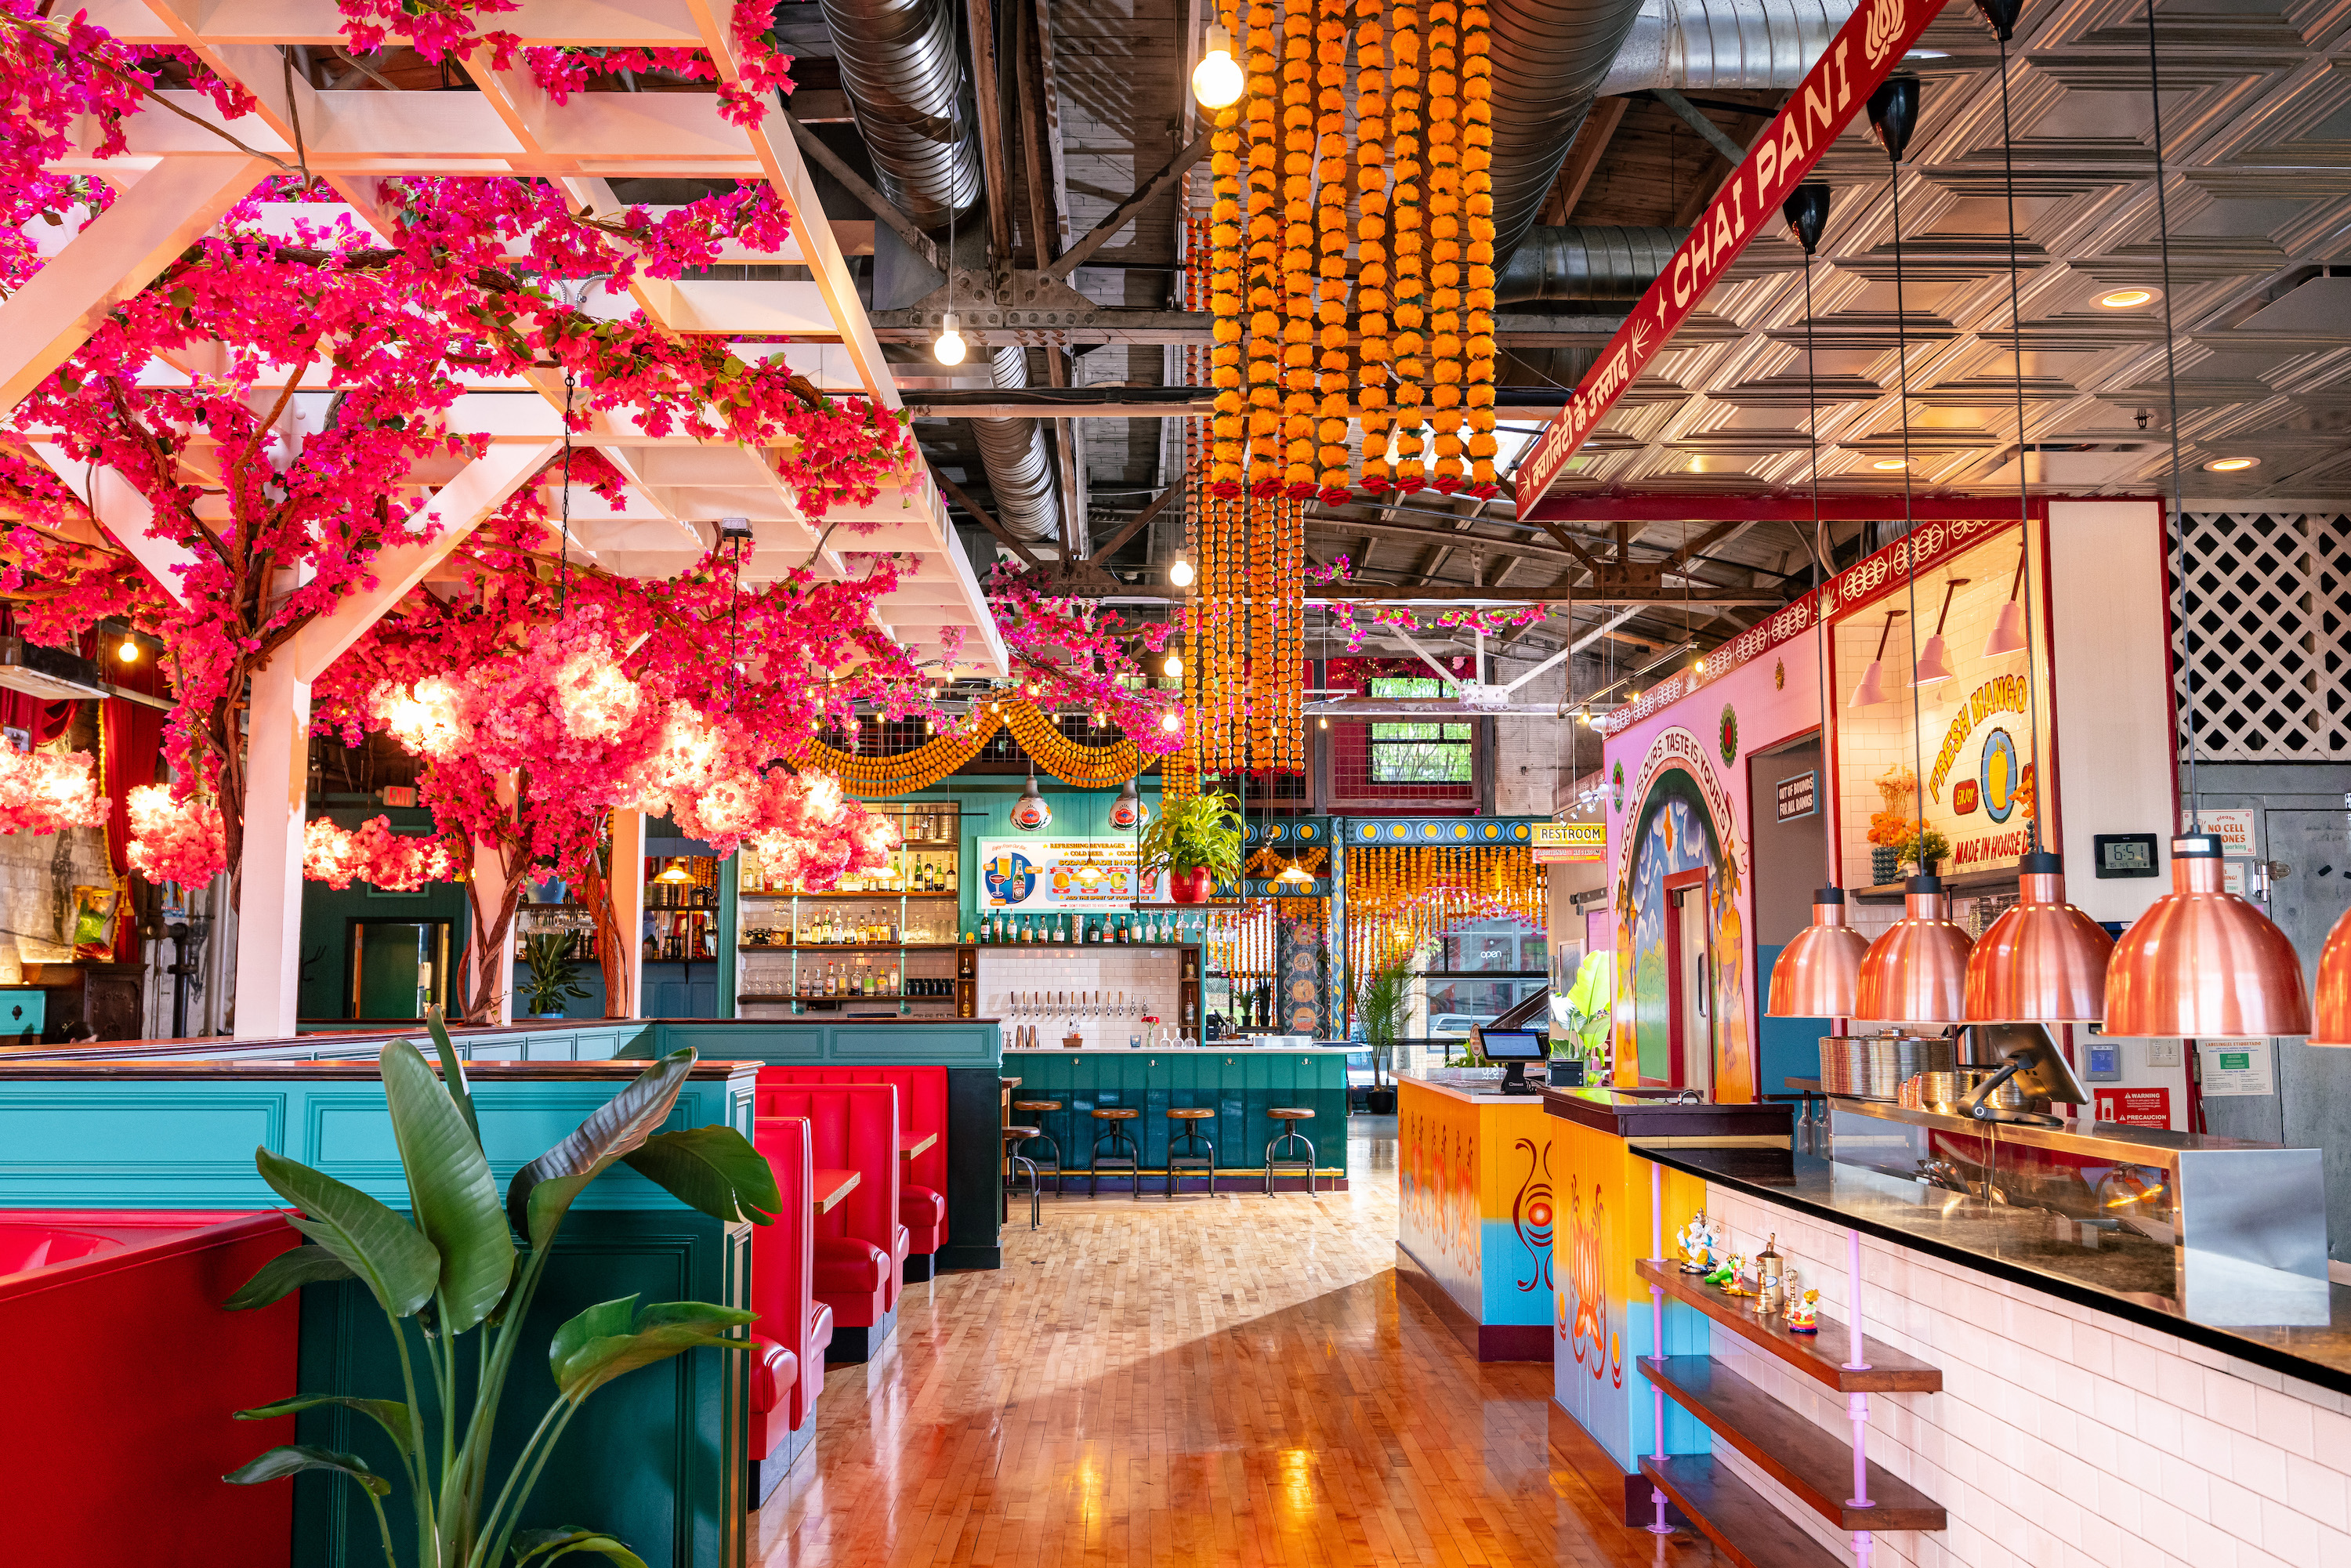 A colorful and bright restaurant space decorated with Indian street style and bright colors of pink, marigold, and teal